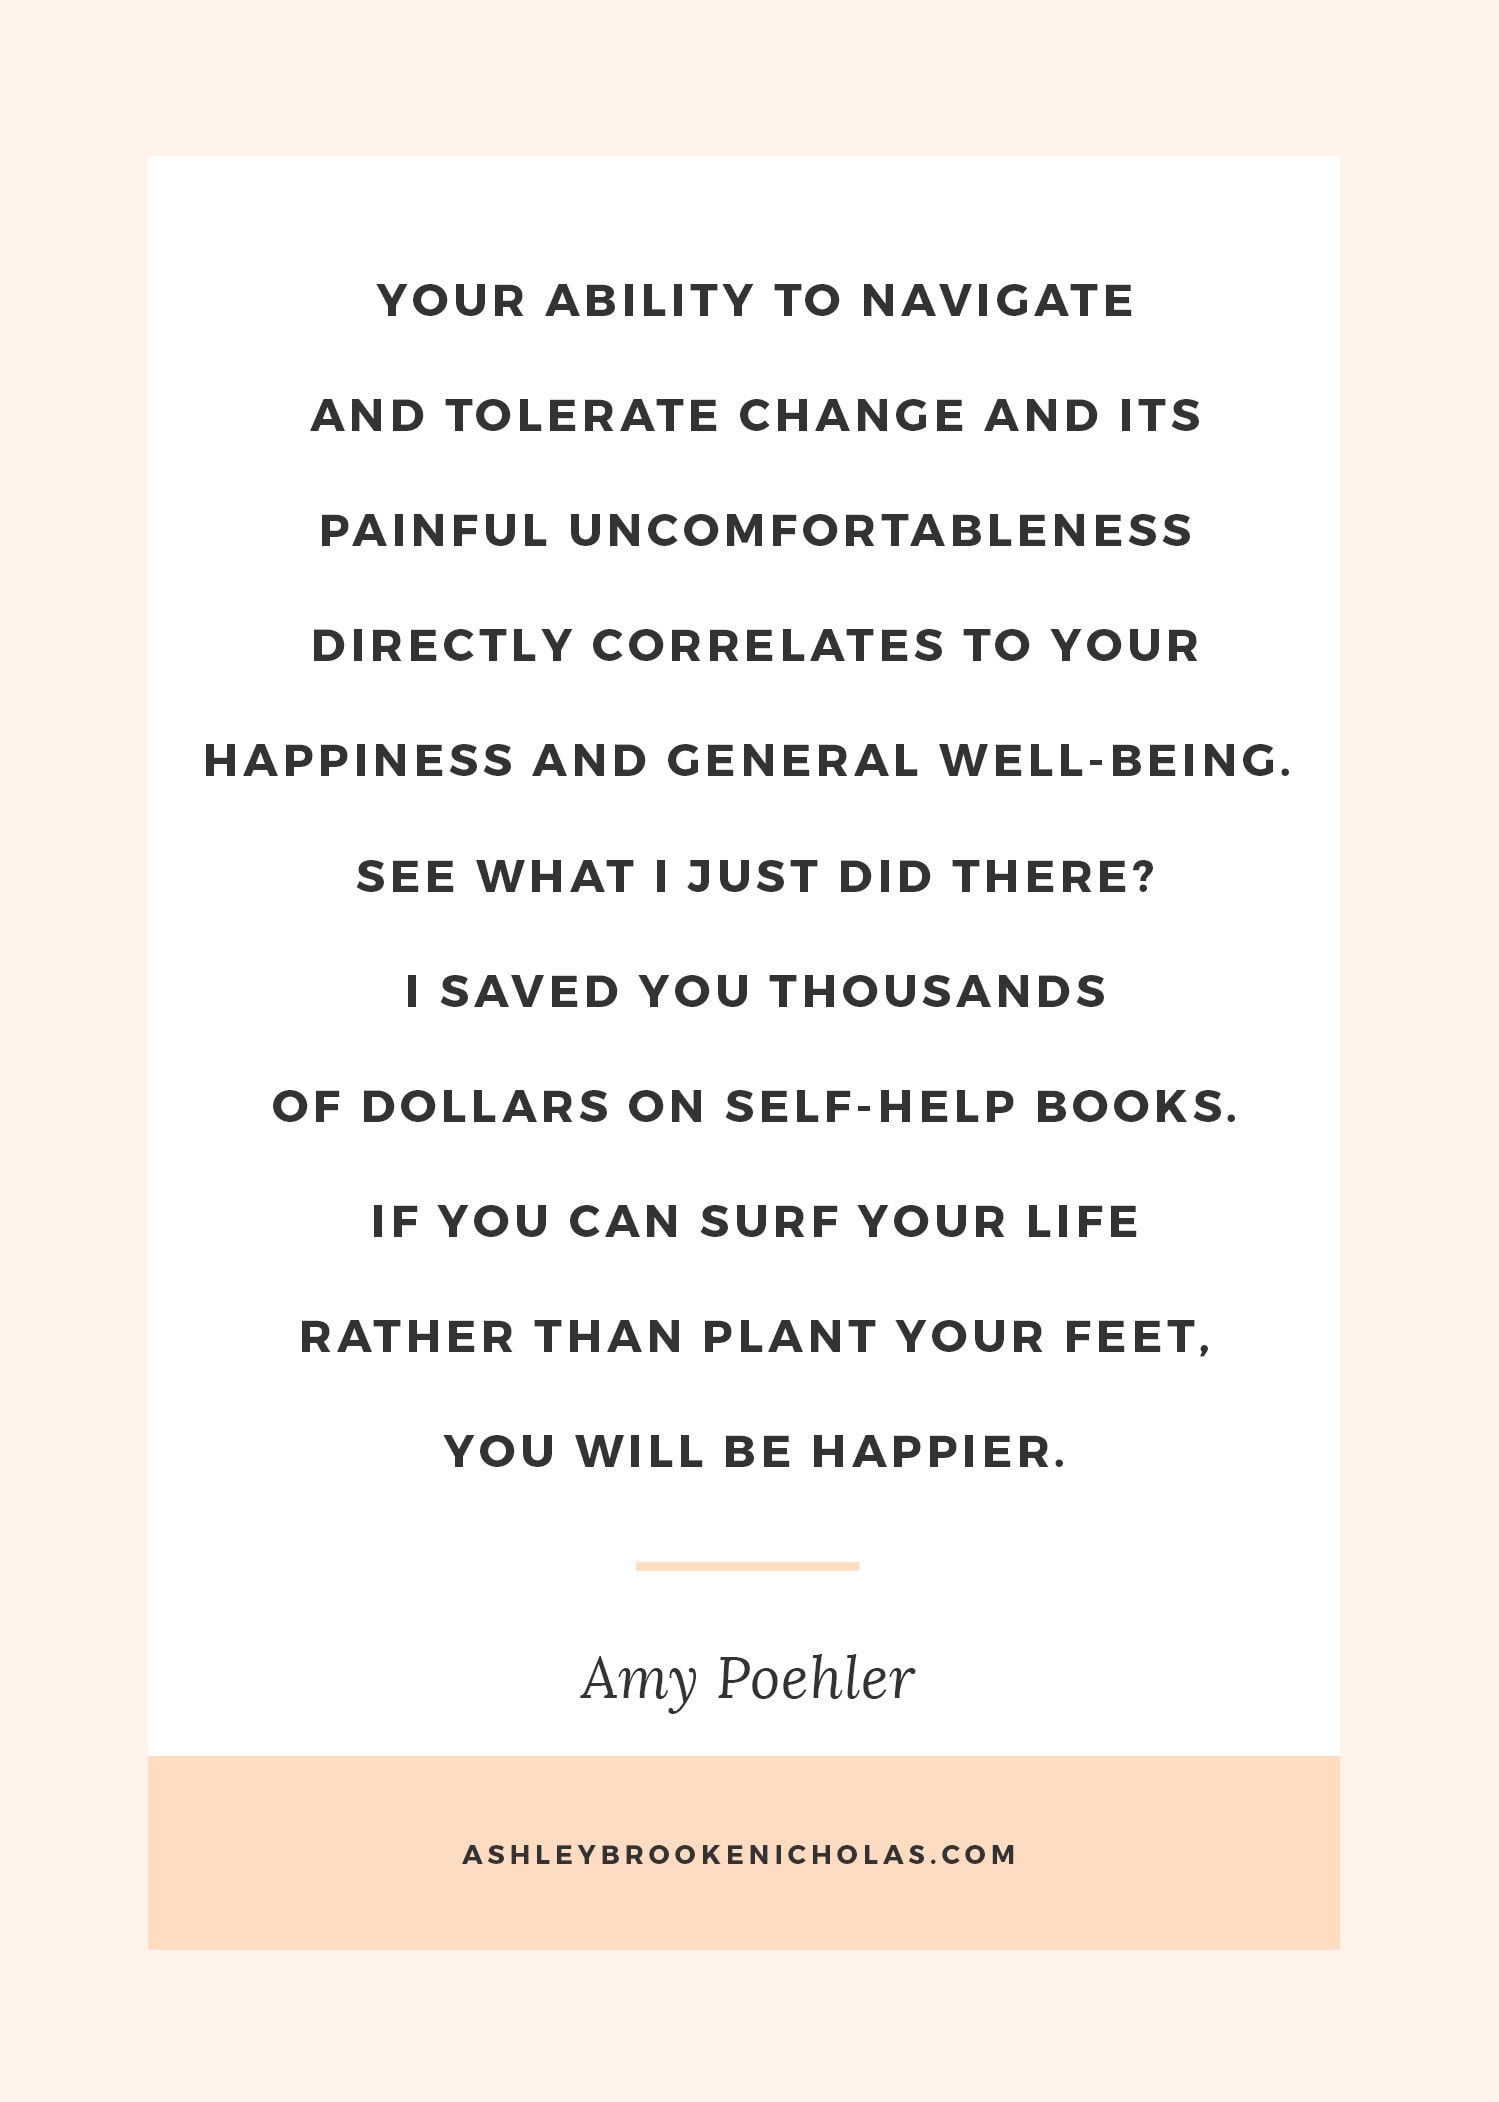 The Best Tina Fey and Amy Poehler quotes | "Your ability to navigate and tolerate change and its painful uncomfortableness directly correlates to your happiness and general well-being. See what I just did there? I saved you thousands of dollars on self-help books. If you can surf your life rather than plant your feet, you will be happier."